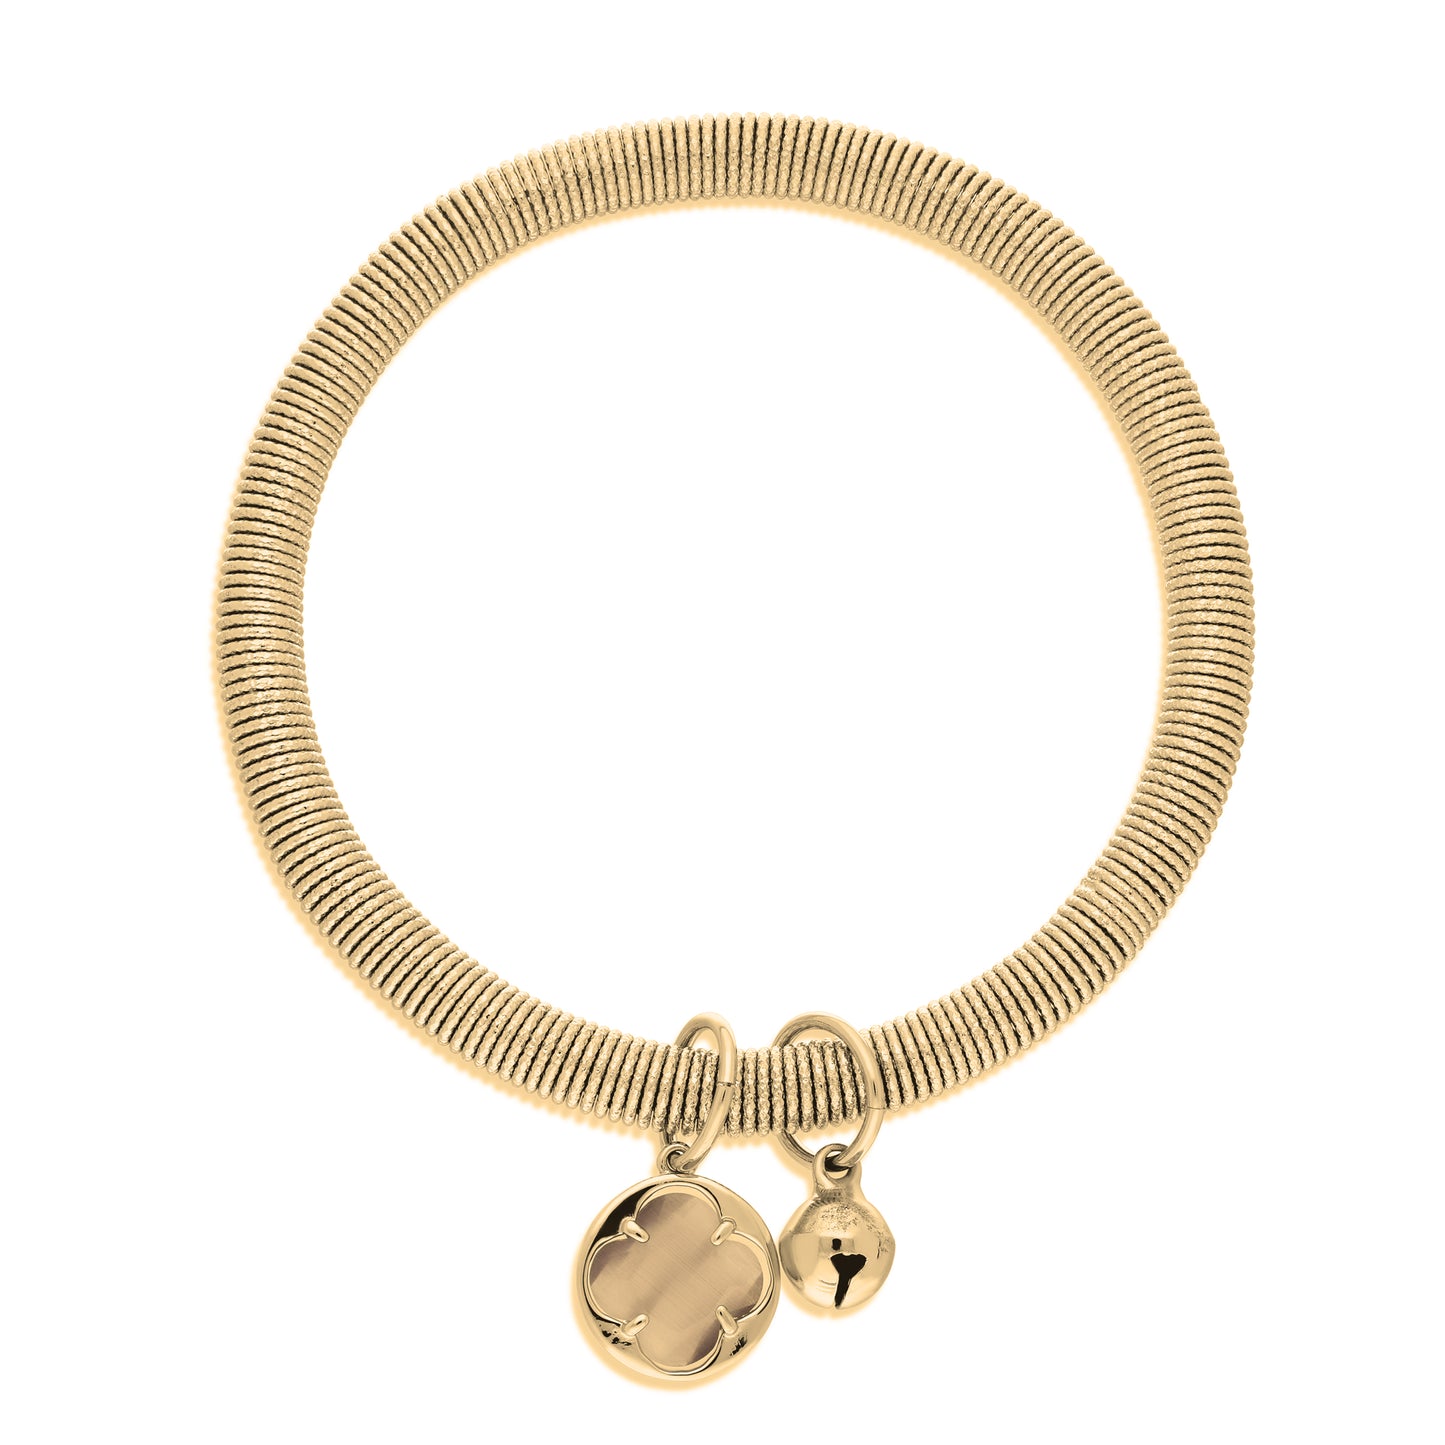 7.5" Stretch Bangle with Charms